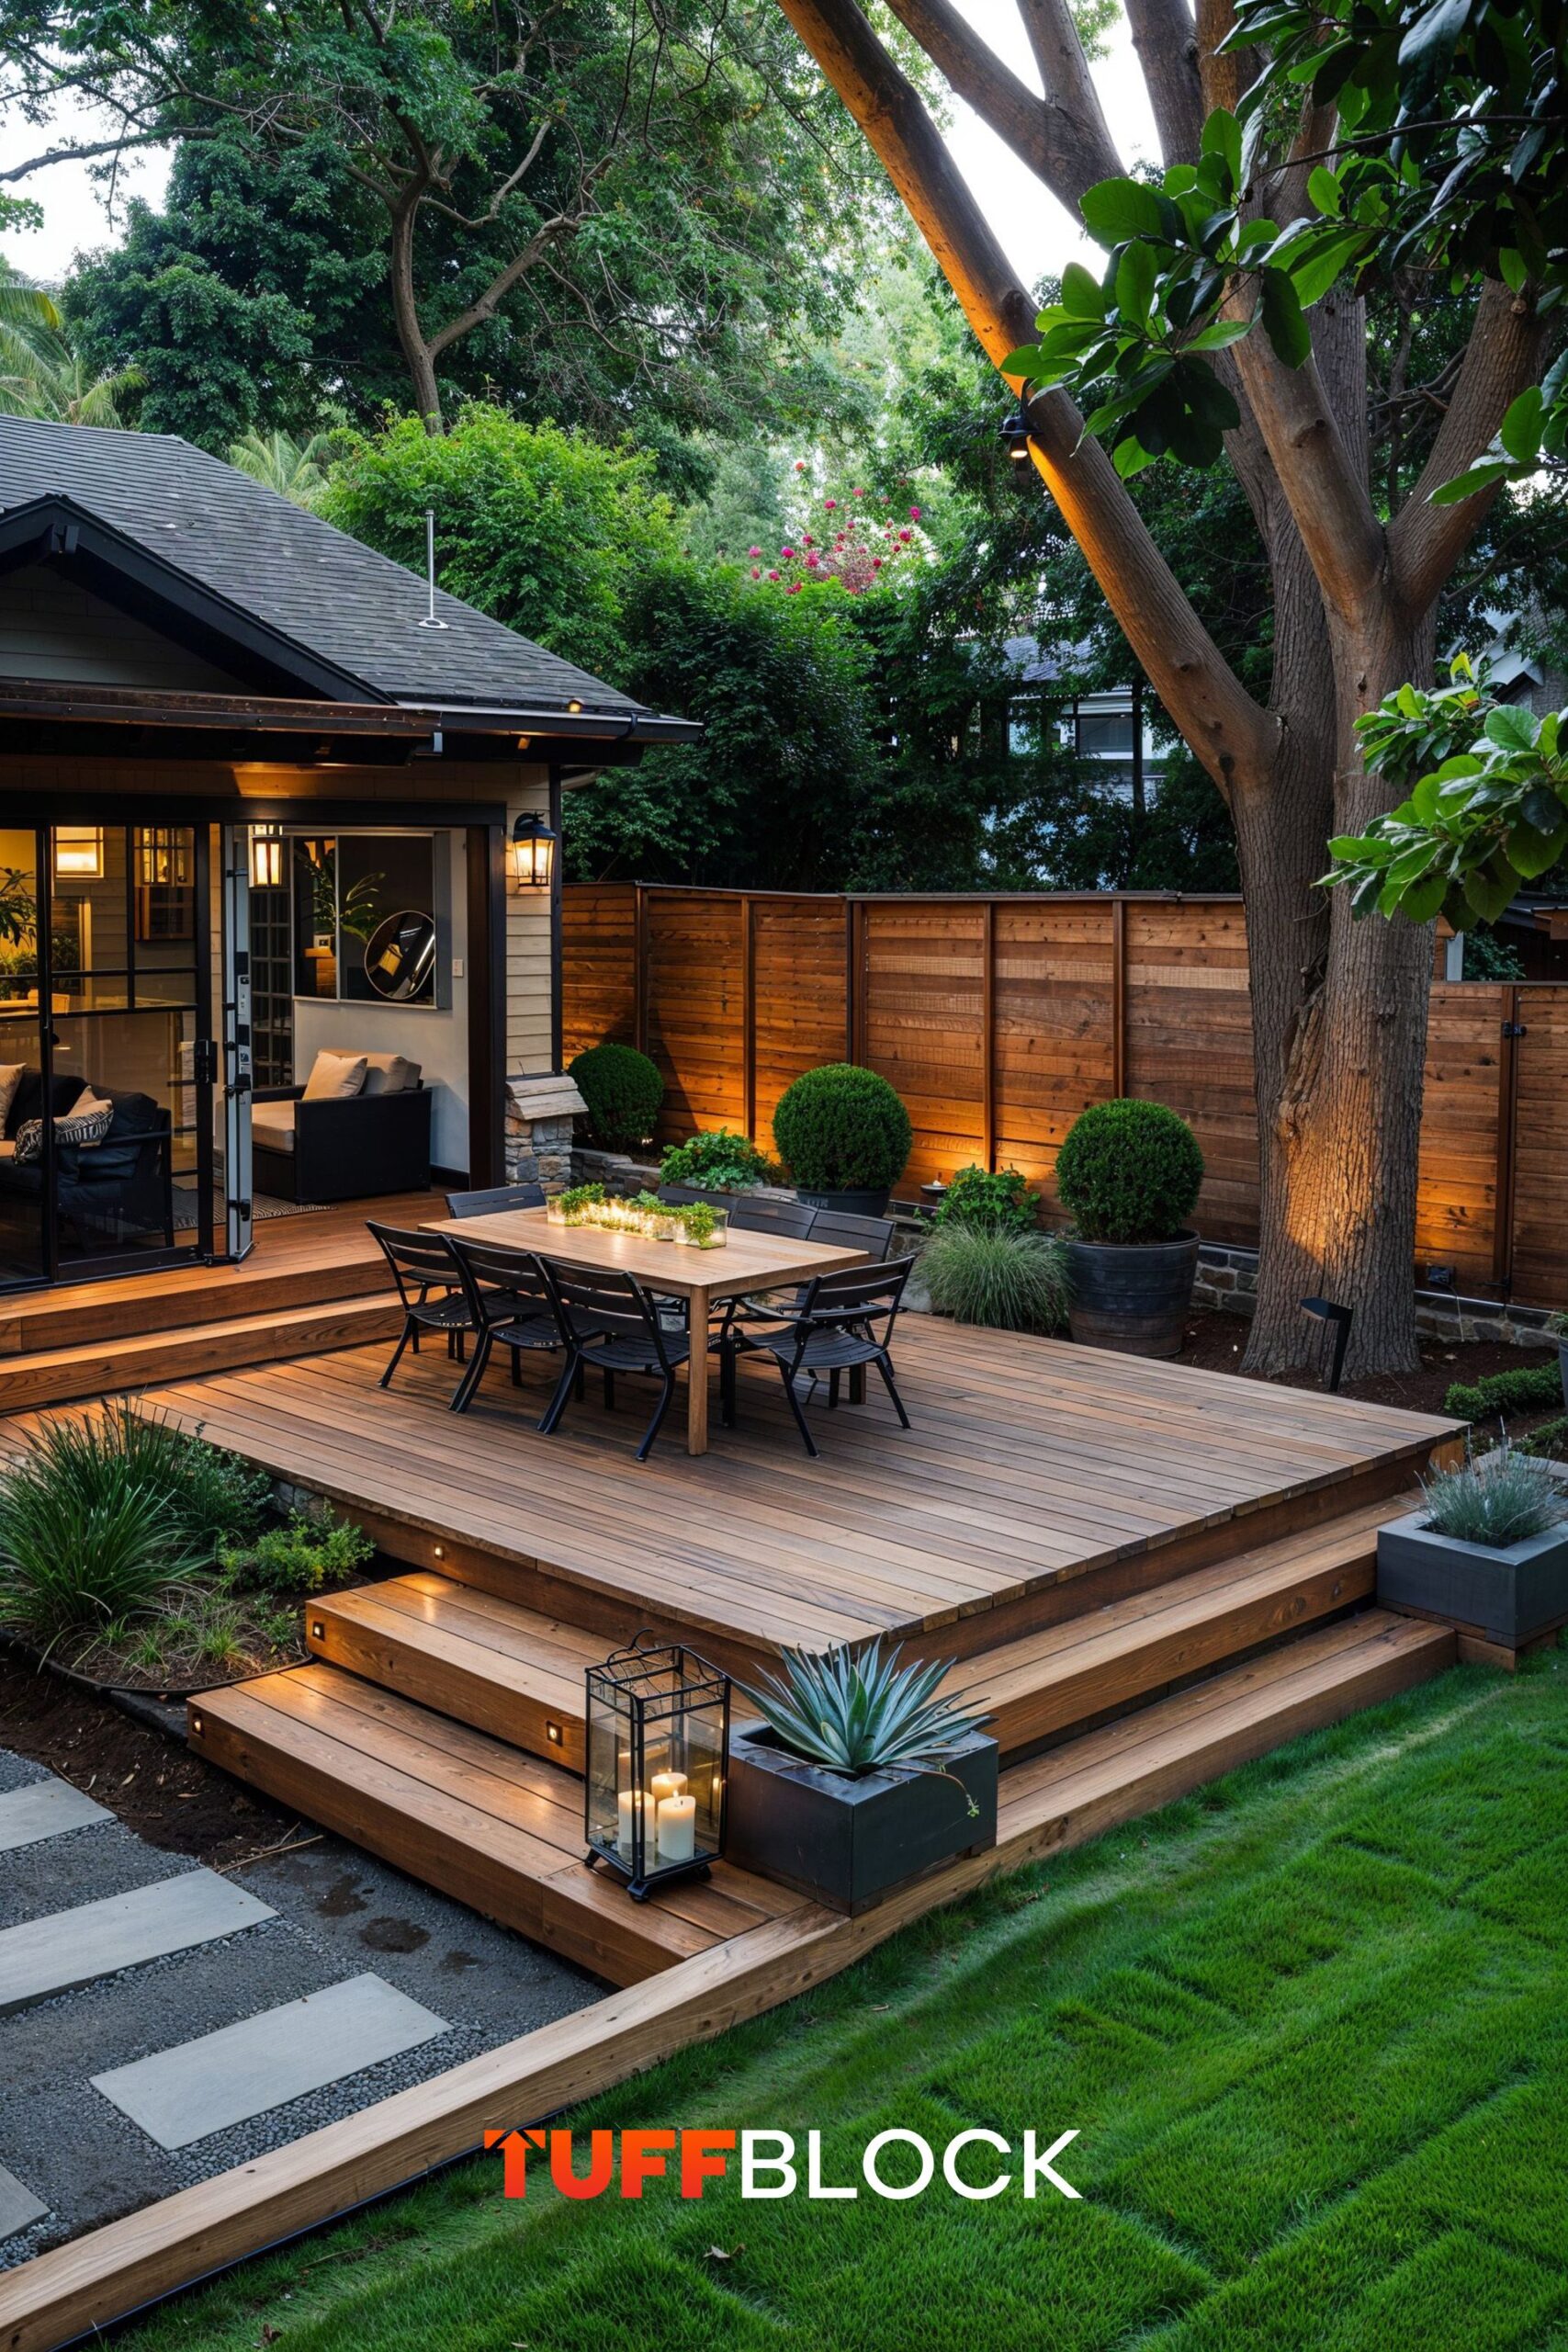 Best Backyard Patio Remodel Transform Your Outdoor Space with a Stunning Patio Update